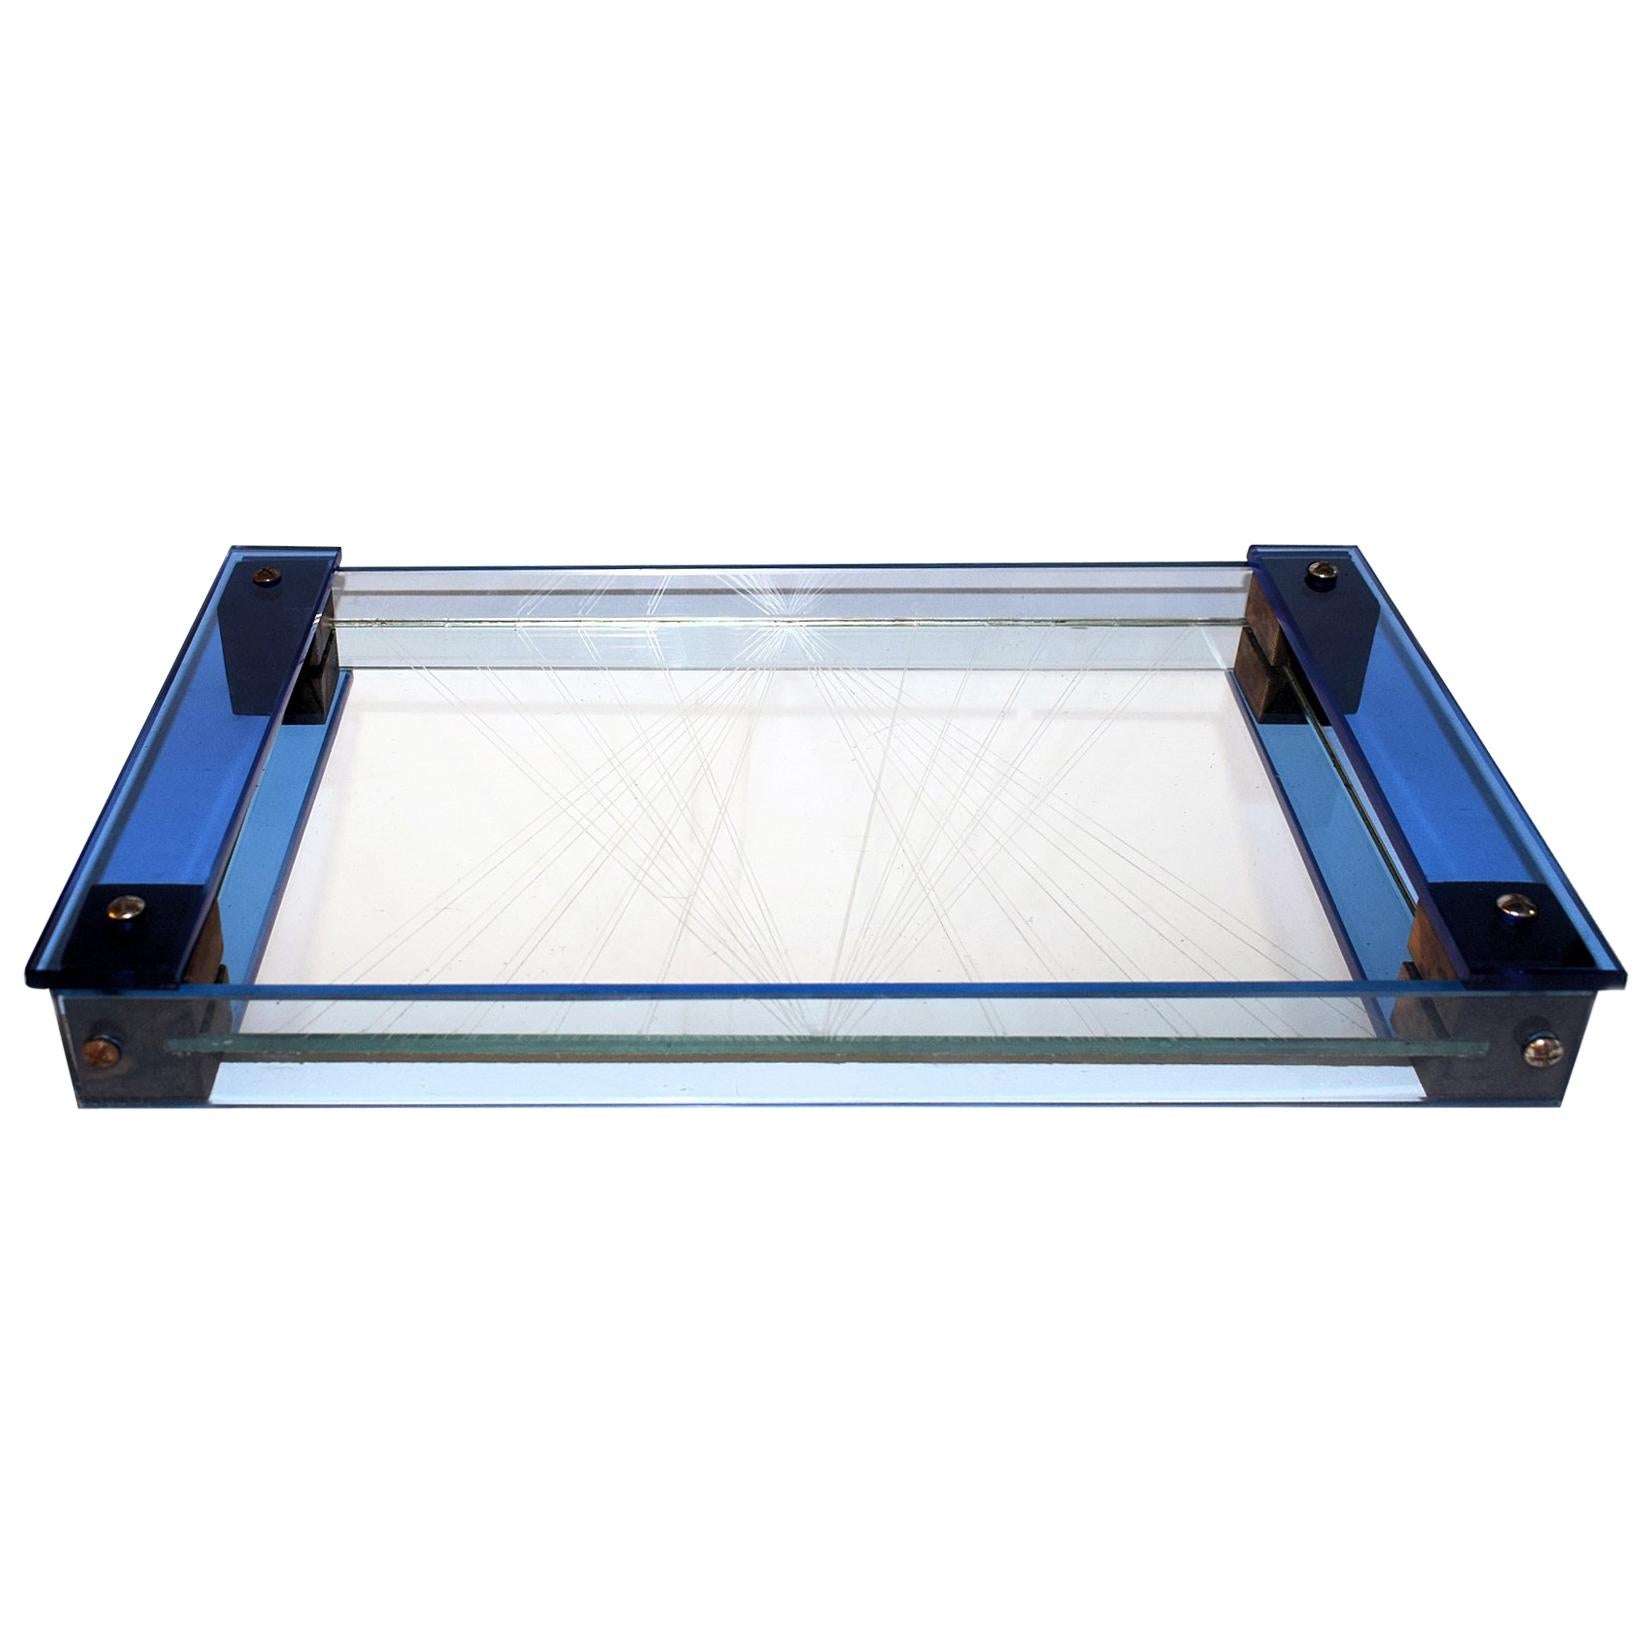 1930s Modernist Art Deco French Blue Glass Tray